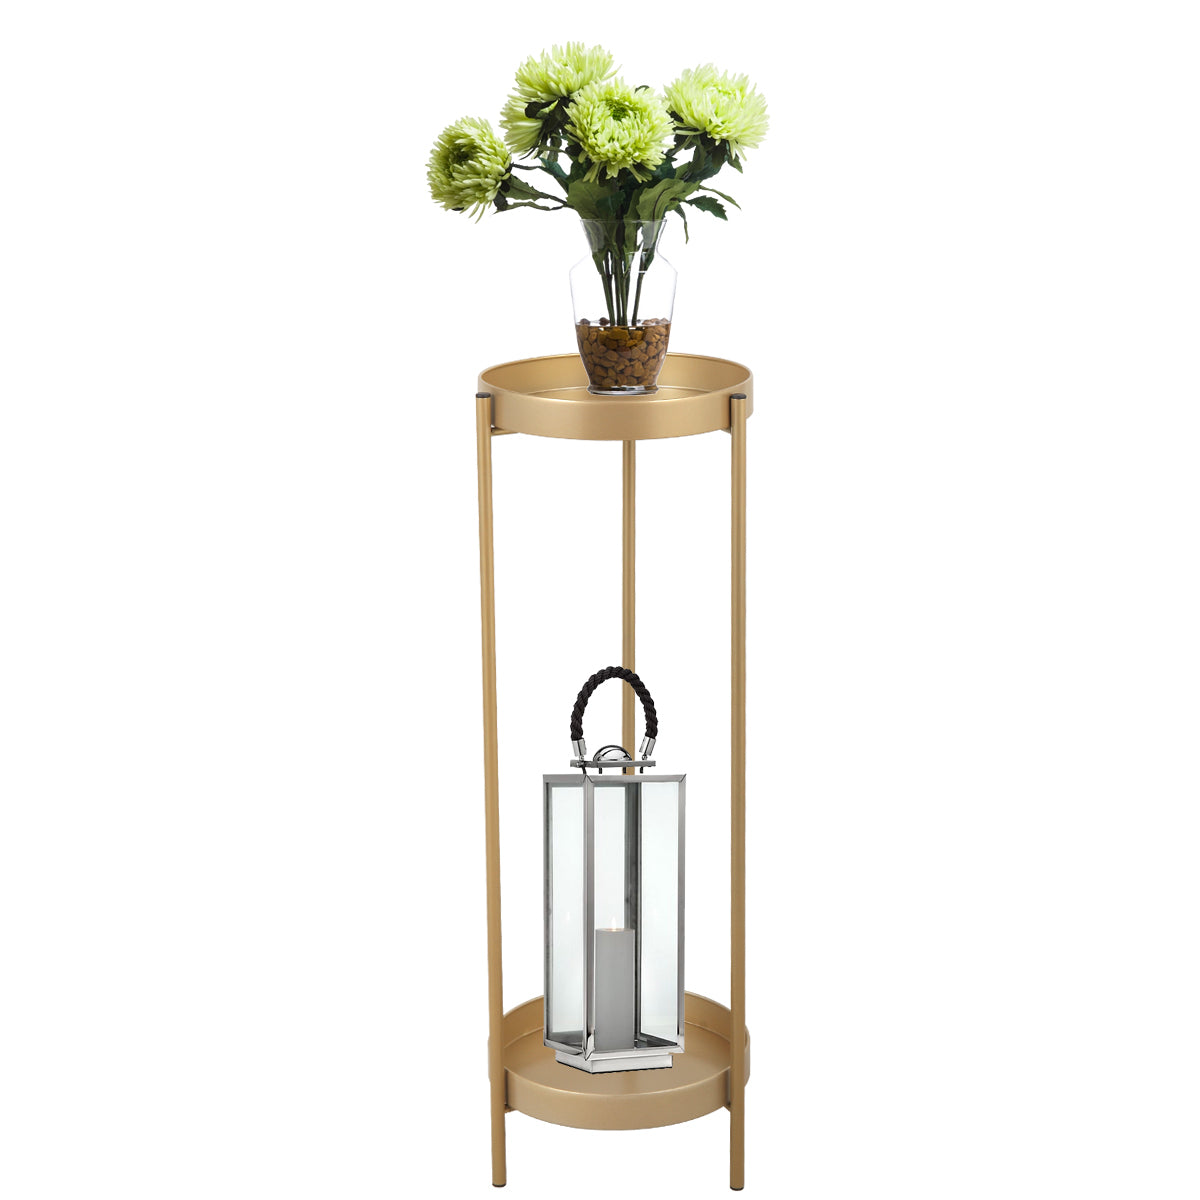 Modern-Folding-Metal-2-Tier-Plant-Stand-Potted-Plant-Holder-Shelf-with-2-Round-Trays-Indoor-Outdoor,-Versatile,-Golden-Pots-&-Planters